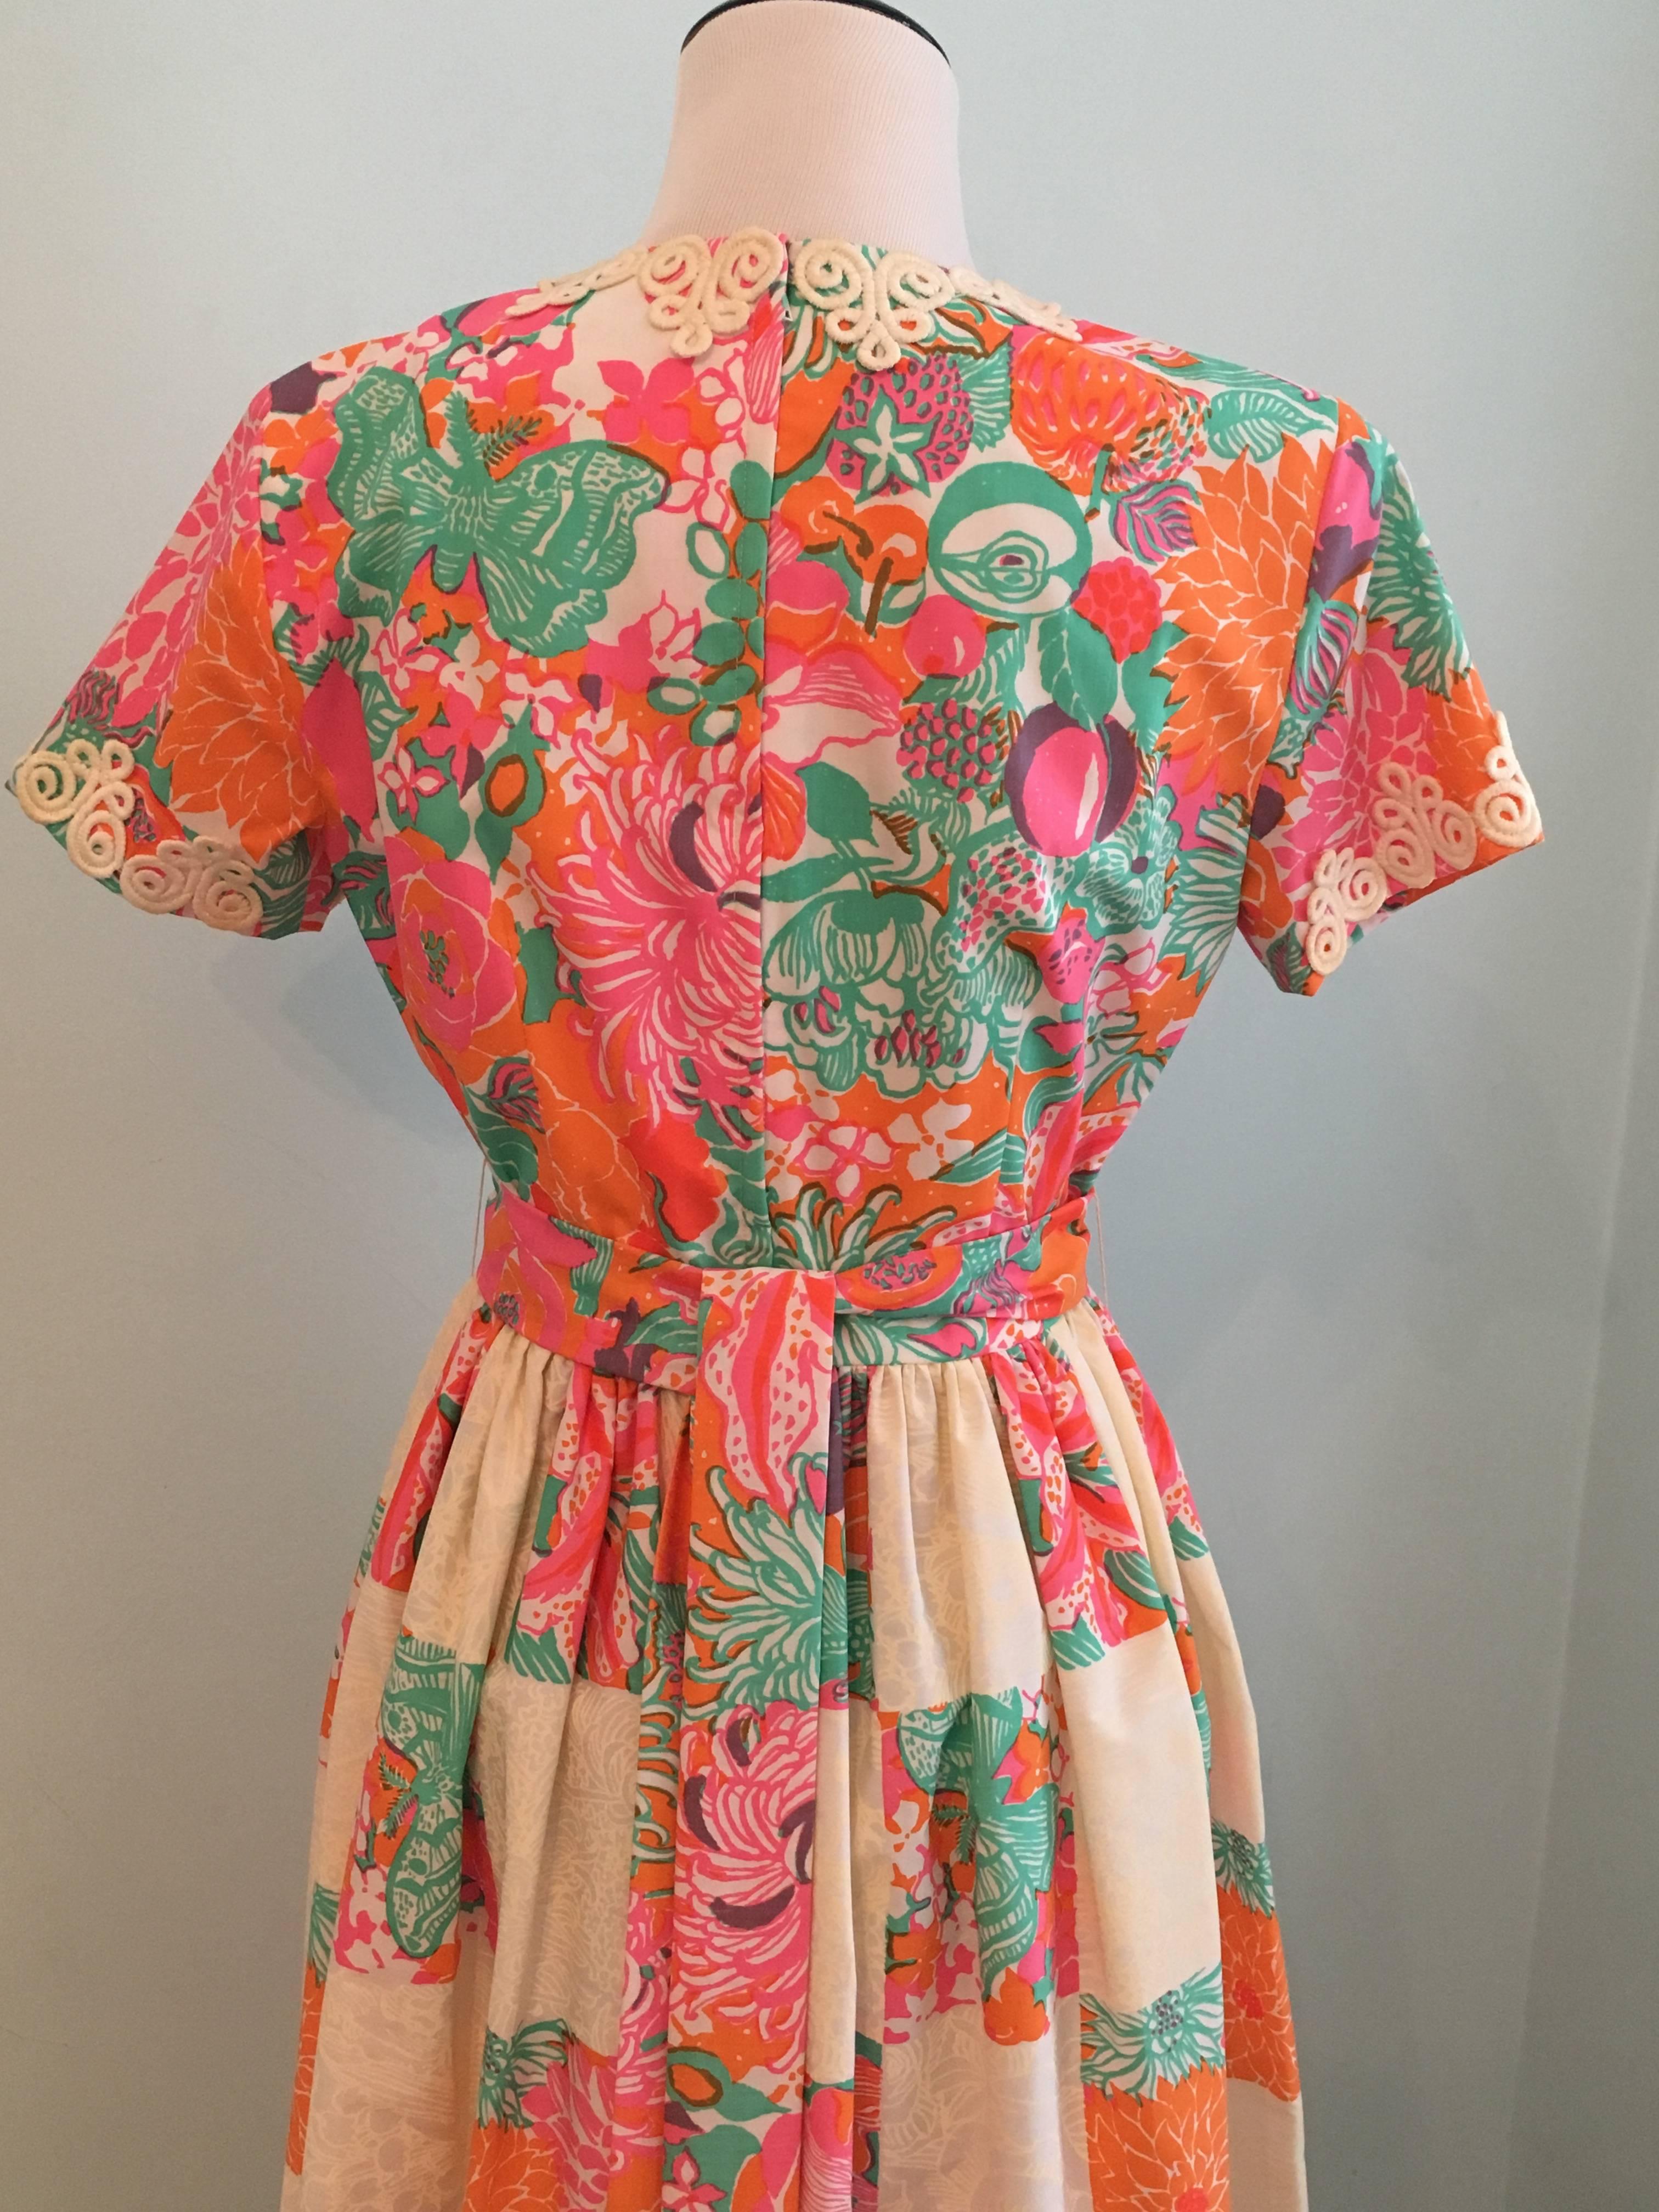 1960s Lilly Pulitzer Maxi Dress with Patchwork Print Skirt For Sale 3